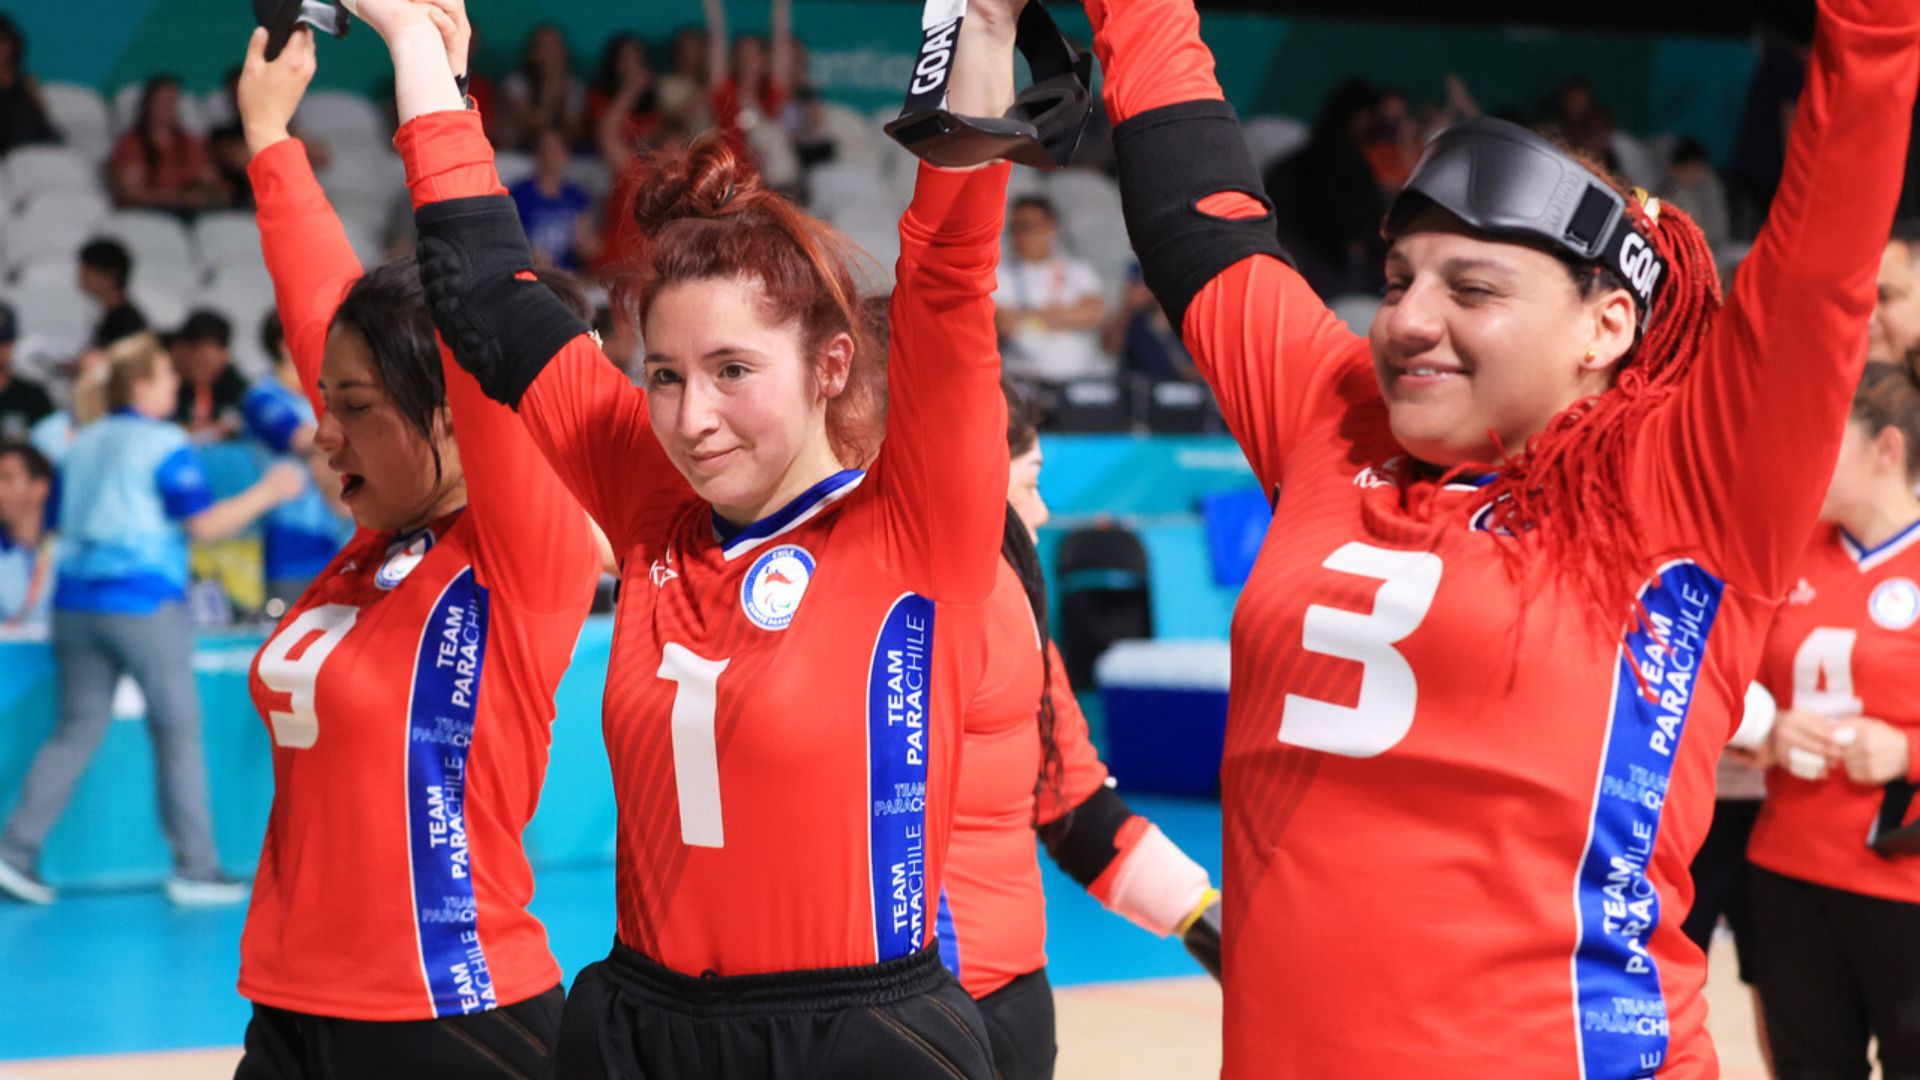 Chile Falls to Canada and Awaits Argentina in Female's Goalball